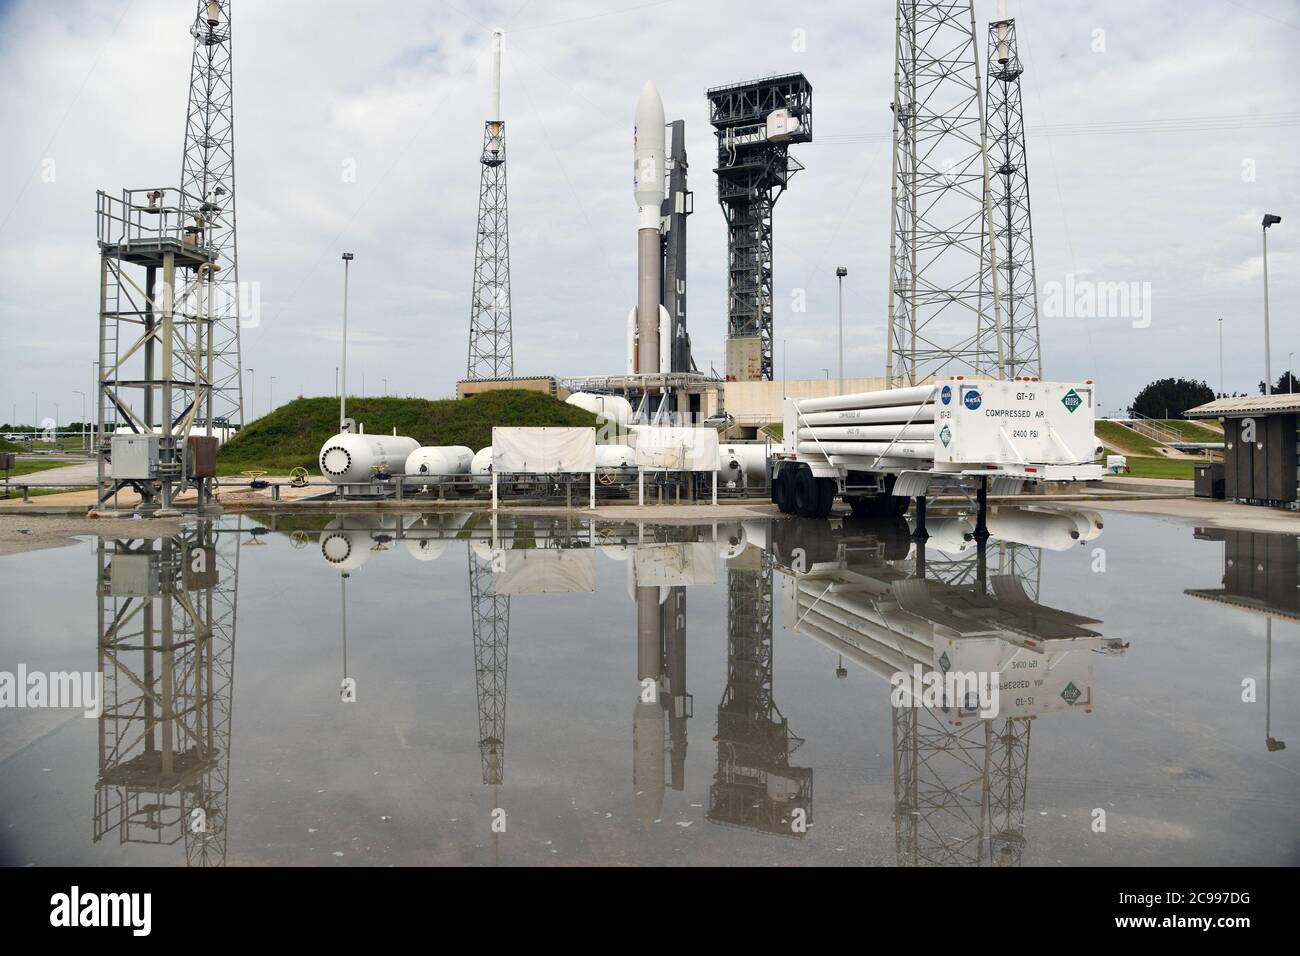 Cape Canaveral, United States. 29th July, 2020. A United Launch Alliance Atlas V rocket is being prepared for launch from Complex 41 at the Cape Canaveral Air Force Station, Florida on Wednesday, July 29, 2020. NASA's 'Perseverance' Rover and 'Ingenuity' Mars Helicopter will be sent on a seven month journey to Mars, planning for an arrival in February 2021. 'Ingenuity', NASA's solar powered drone, will be the first craft to fly on another planet. Photo by Joe Marino/UPI Credit: UPI/Alamy Live News Stock Photo